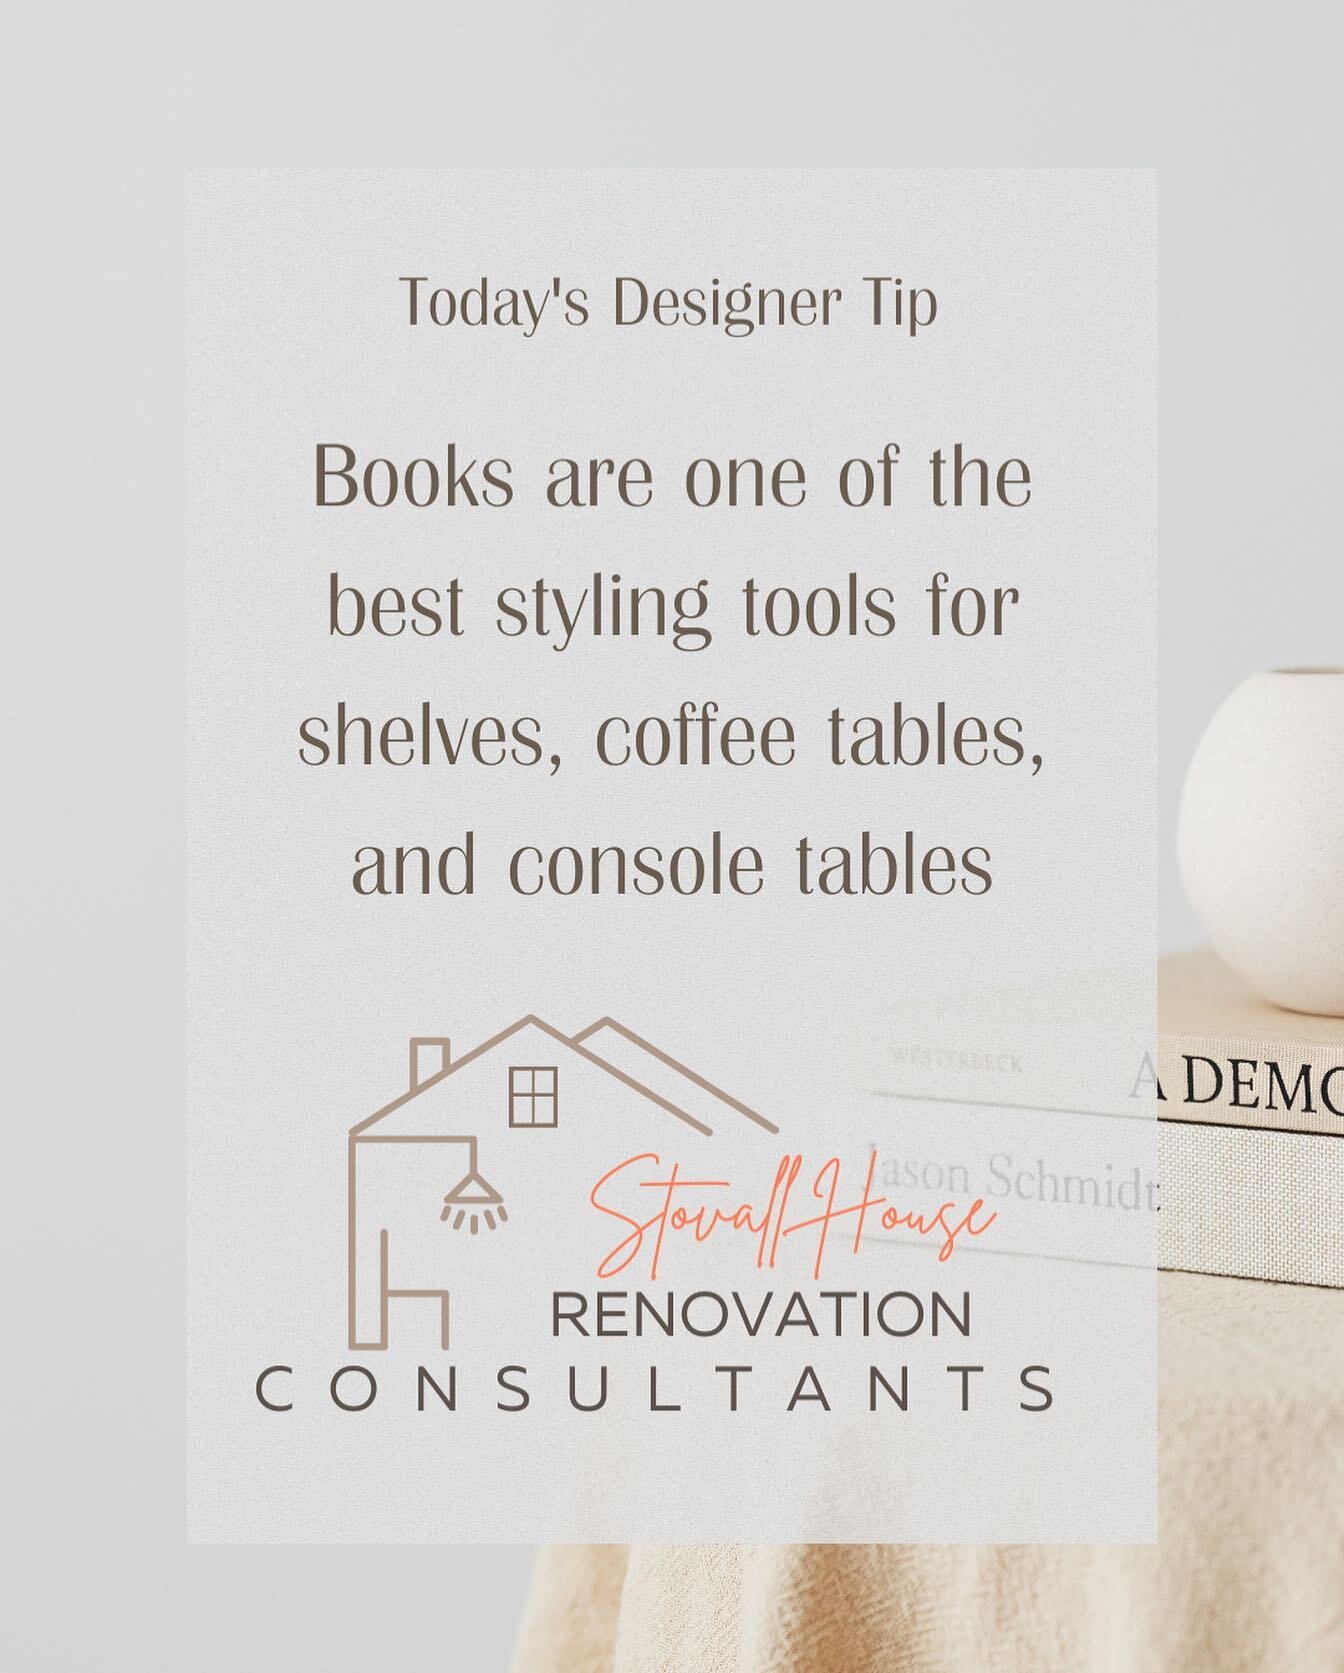 Books can be used as a styling tool by stacking them to create a decorative accent, using them to elevate decorative items, or arranging them by color or size to add visual interest to a space.

In addition to using books as a styling tool, there are